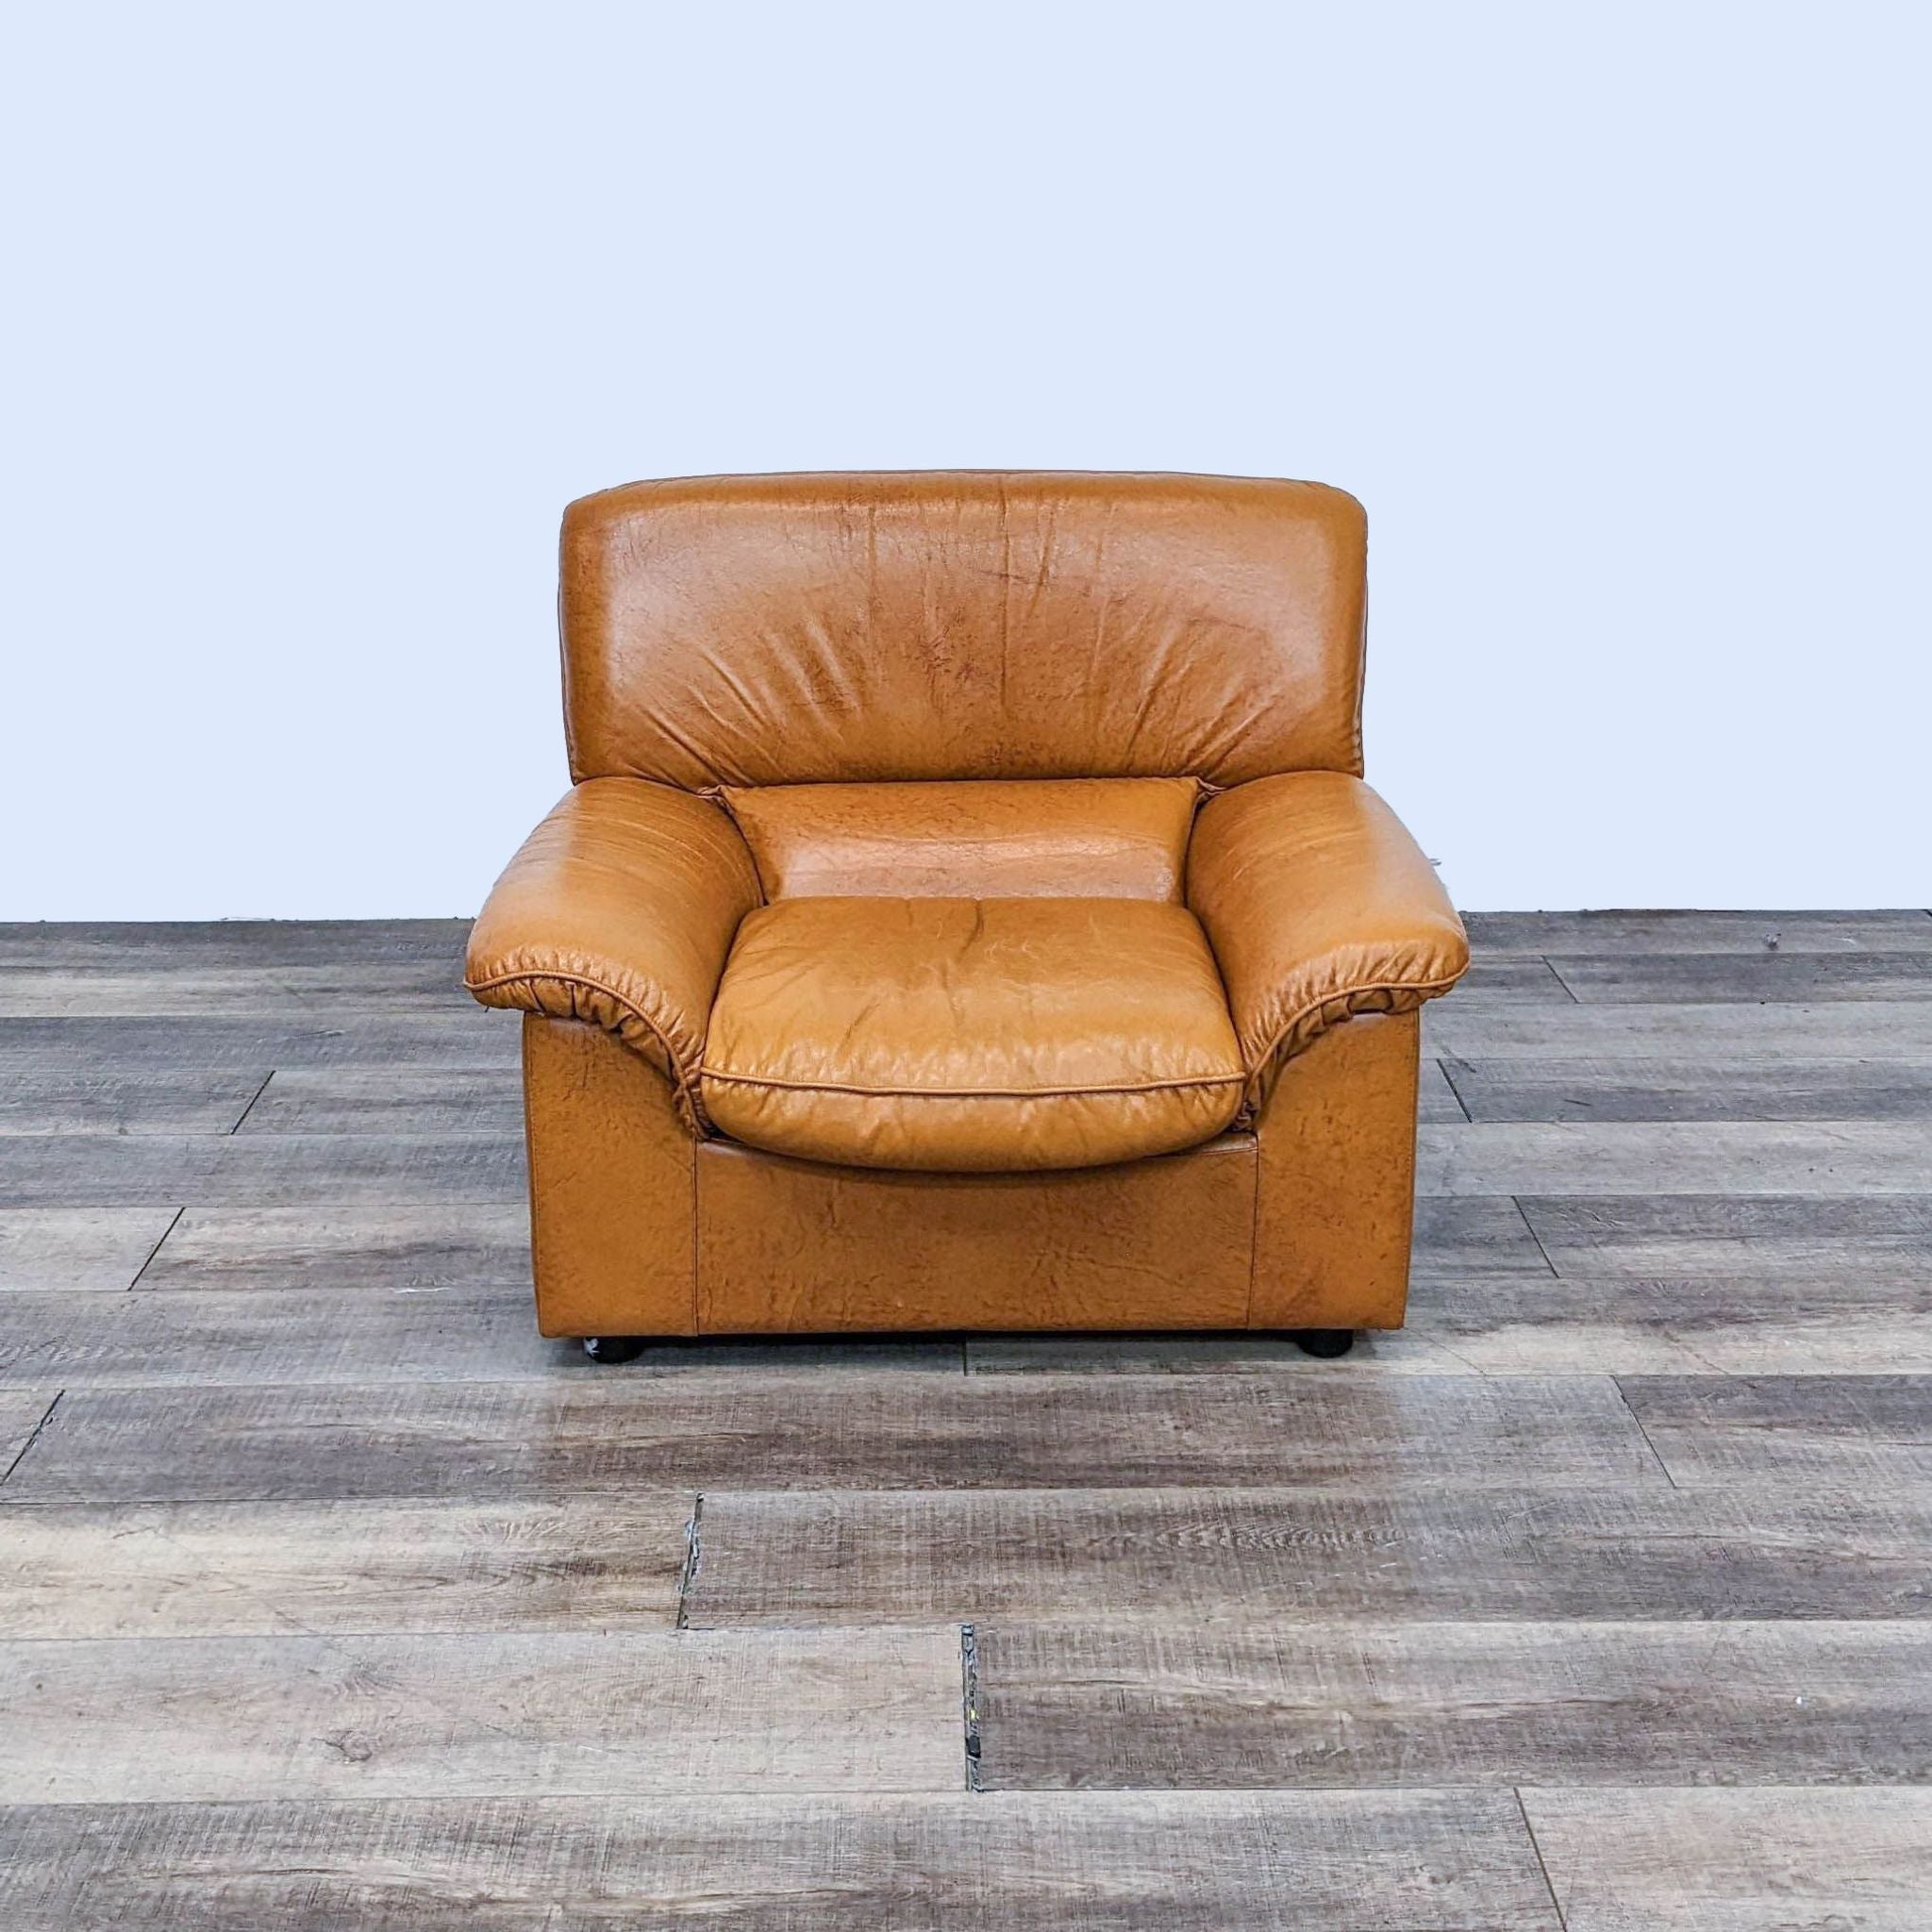 Reperch brand modern leather club chair with plush cushions, rounded arms, and wooden feet on a wood floor.